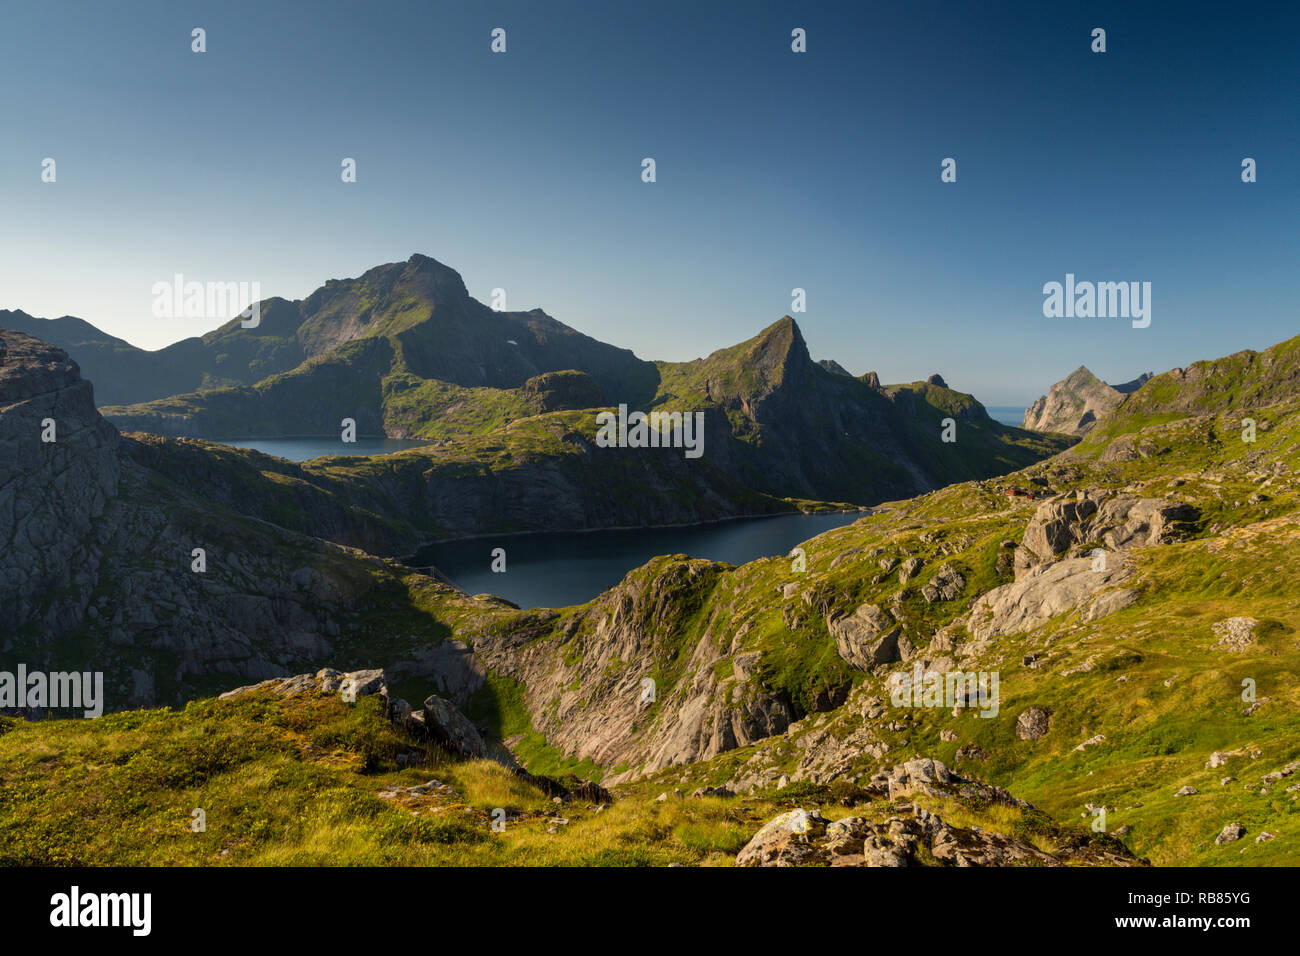 View of the mountains, lakes and fjords near Sørvågen on Moskenesøya, the Lofoten islands in Norway, Europe. Also shows Hermannsdalstinden mountain. Stock Photo